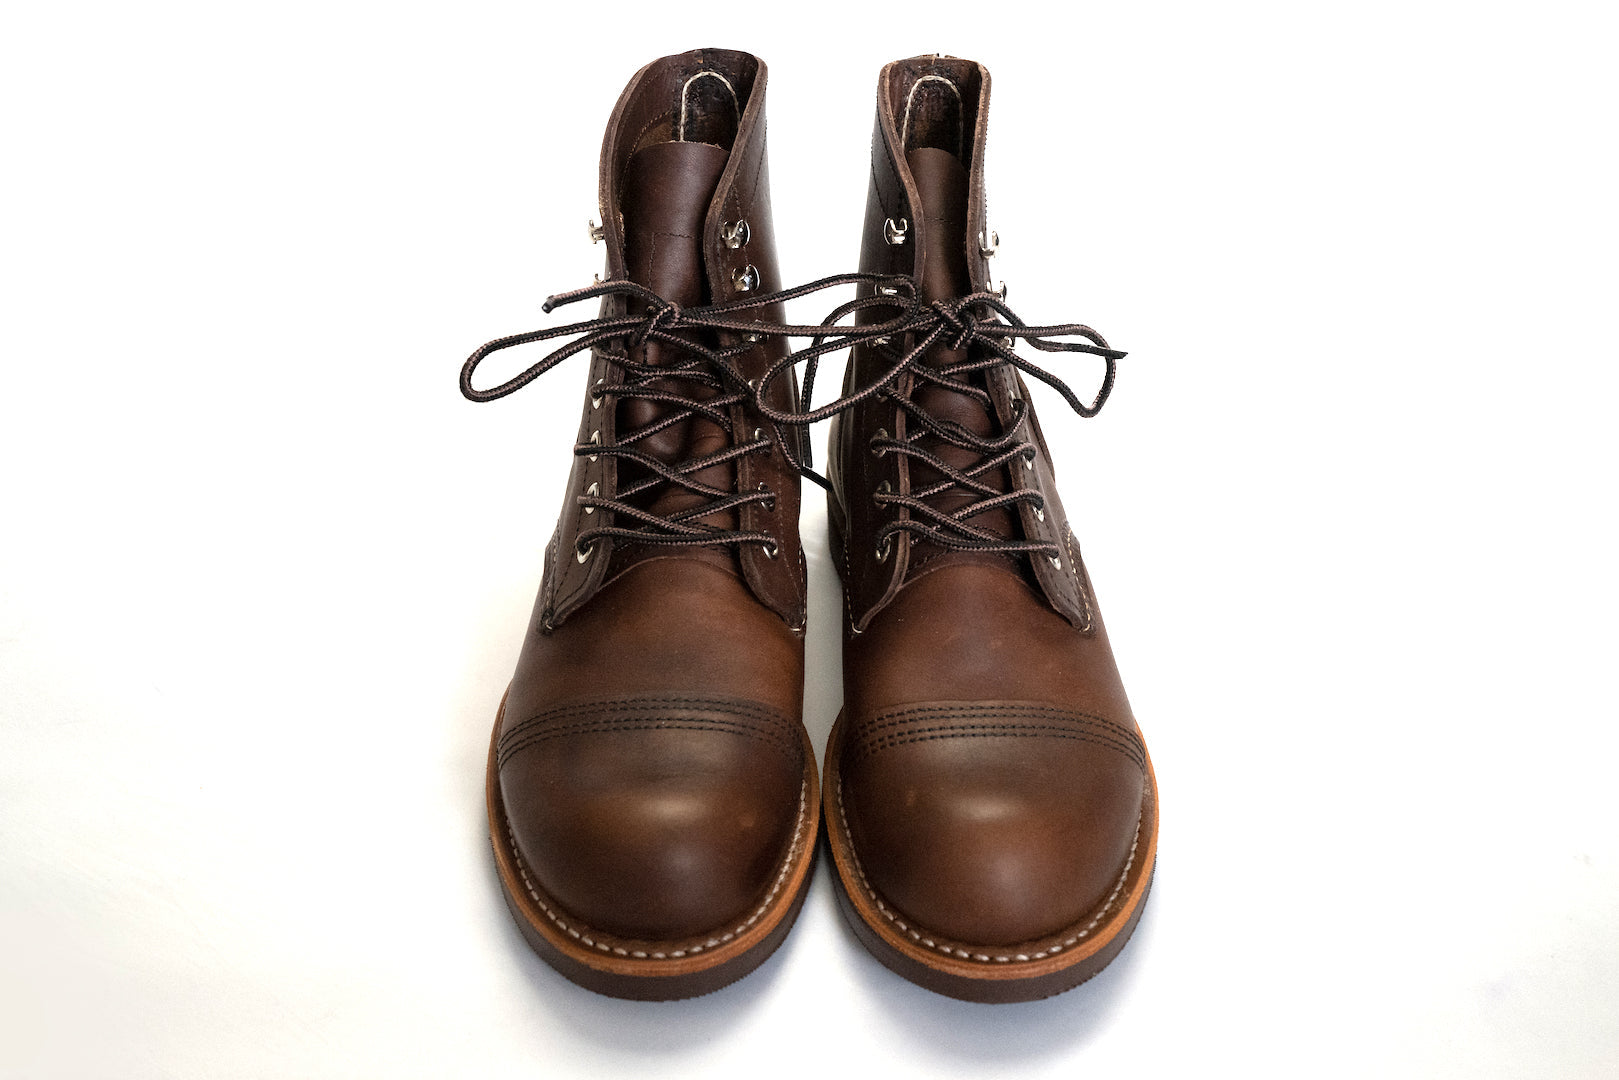 Red Wing Boots 8111